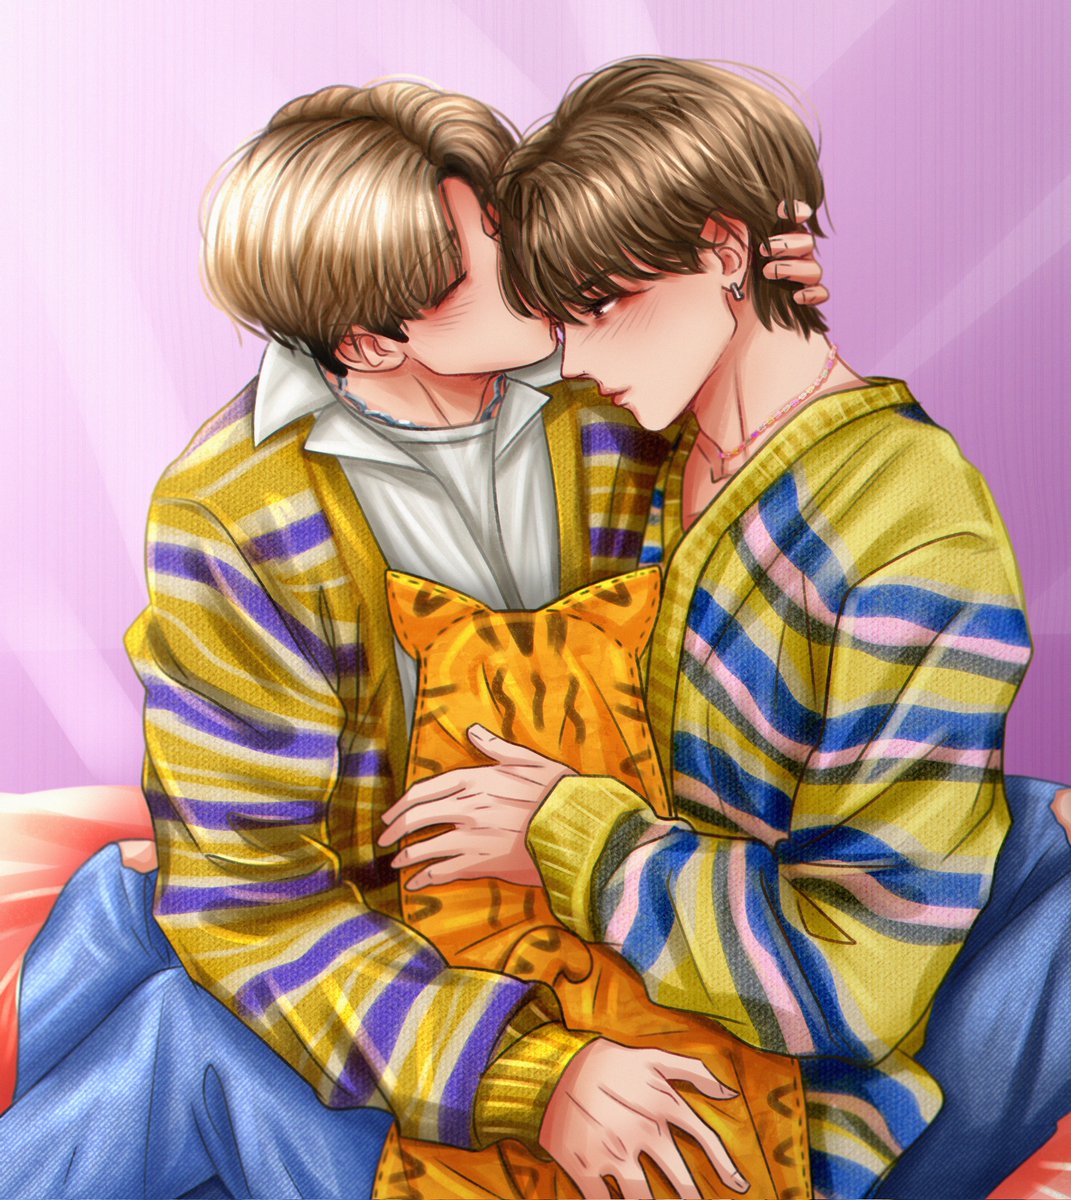 Jikook - My Dog Stepped On A Bee by nackmu on DeviantArt